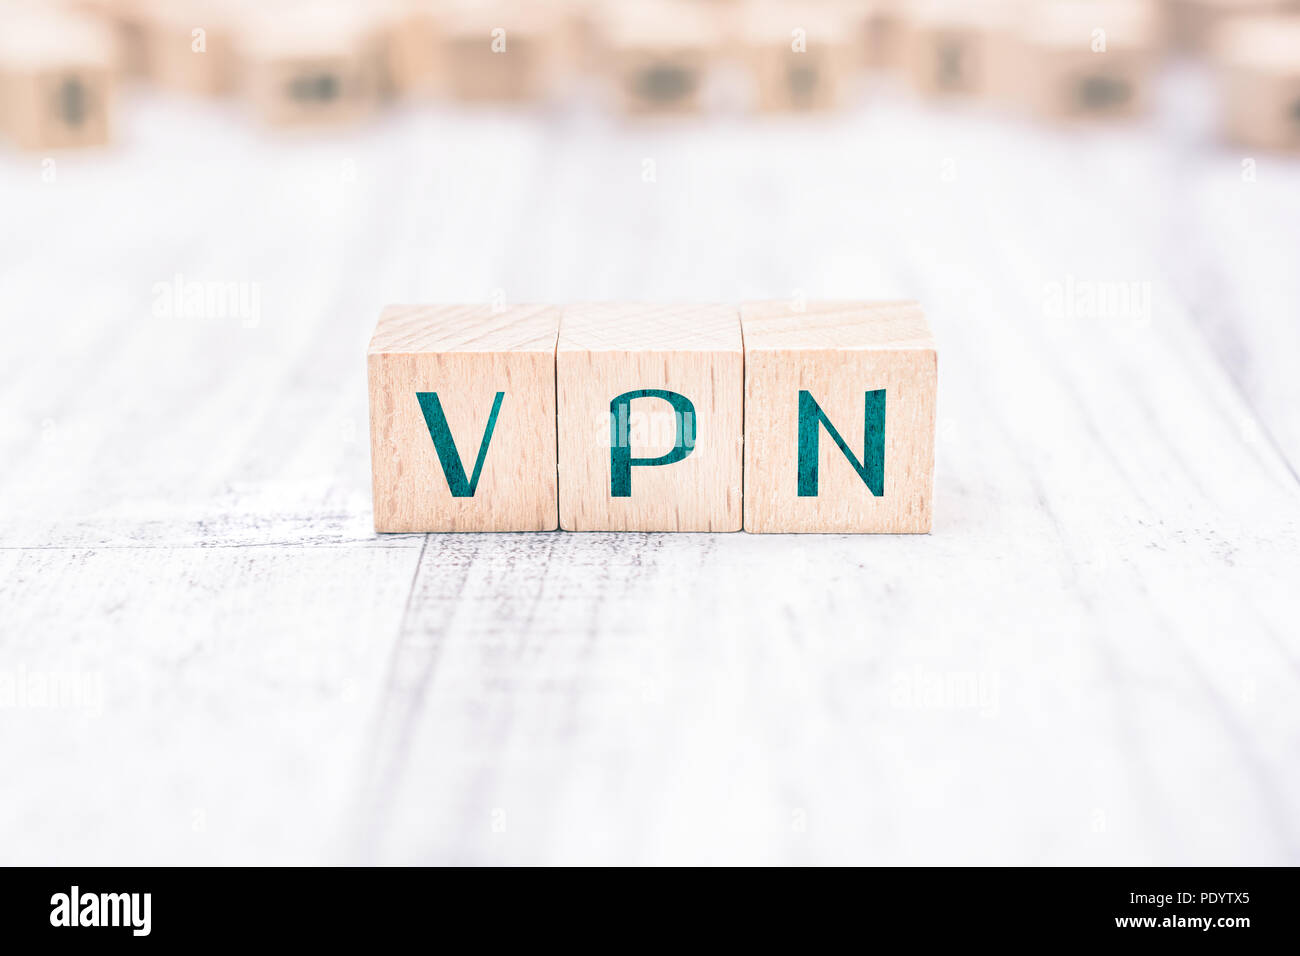 The Word VPN Formed By Wooden Blocks On A White Table Stock Photo